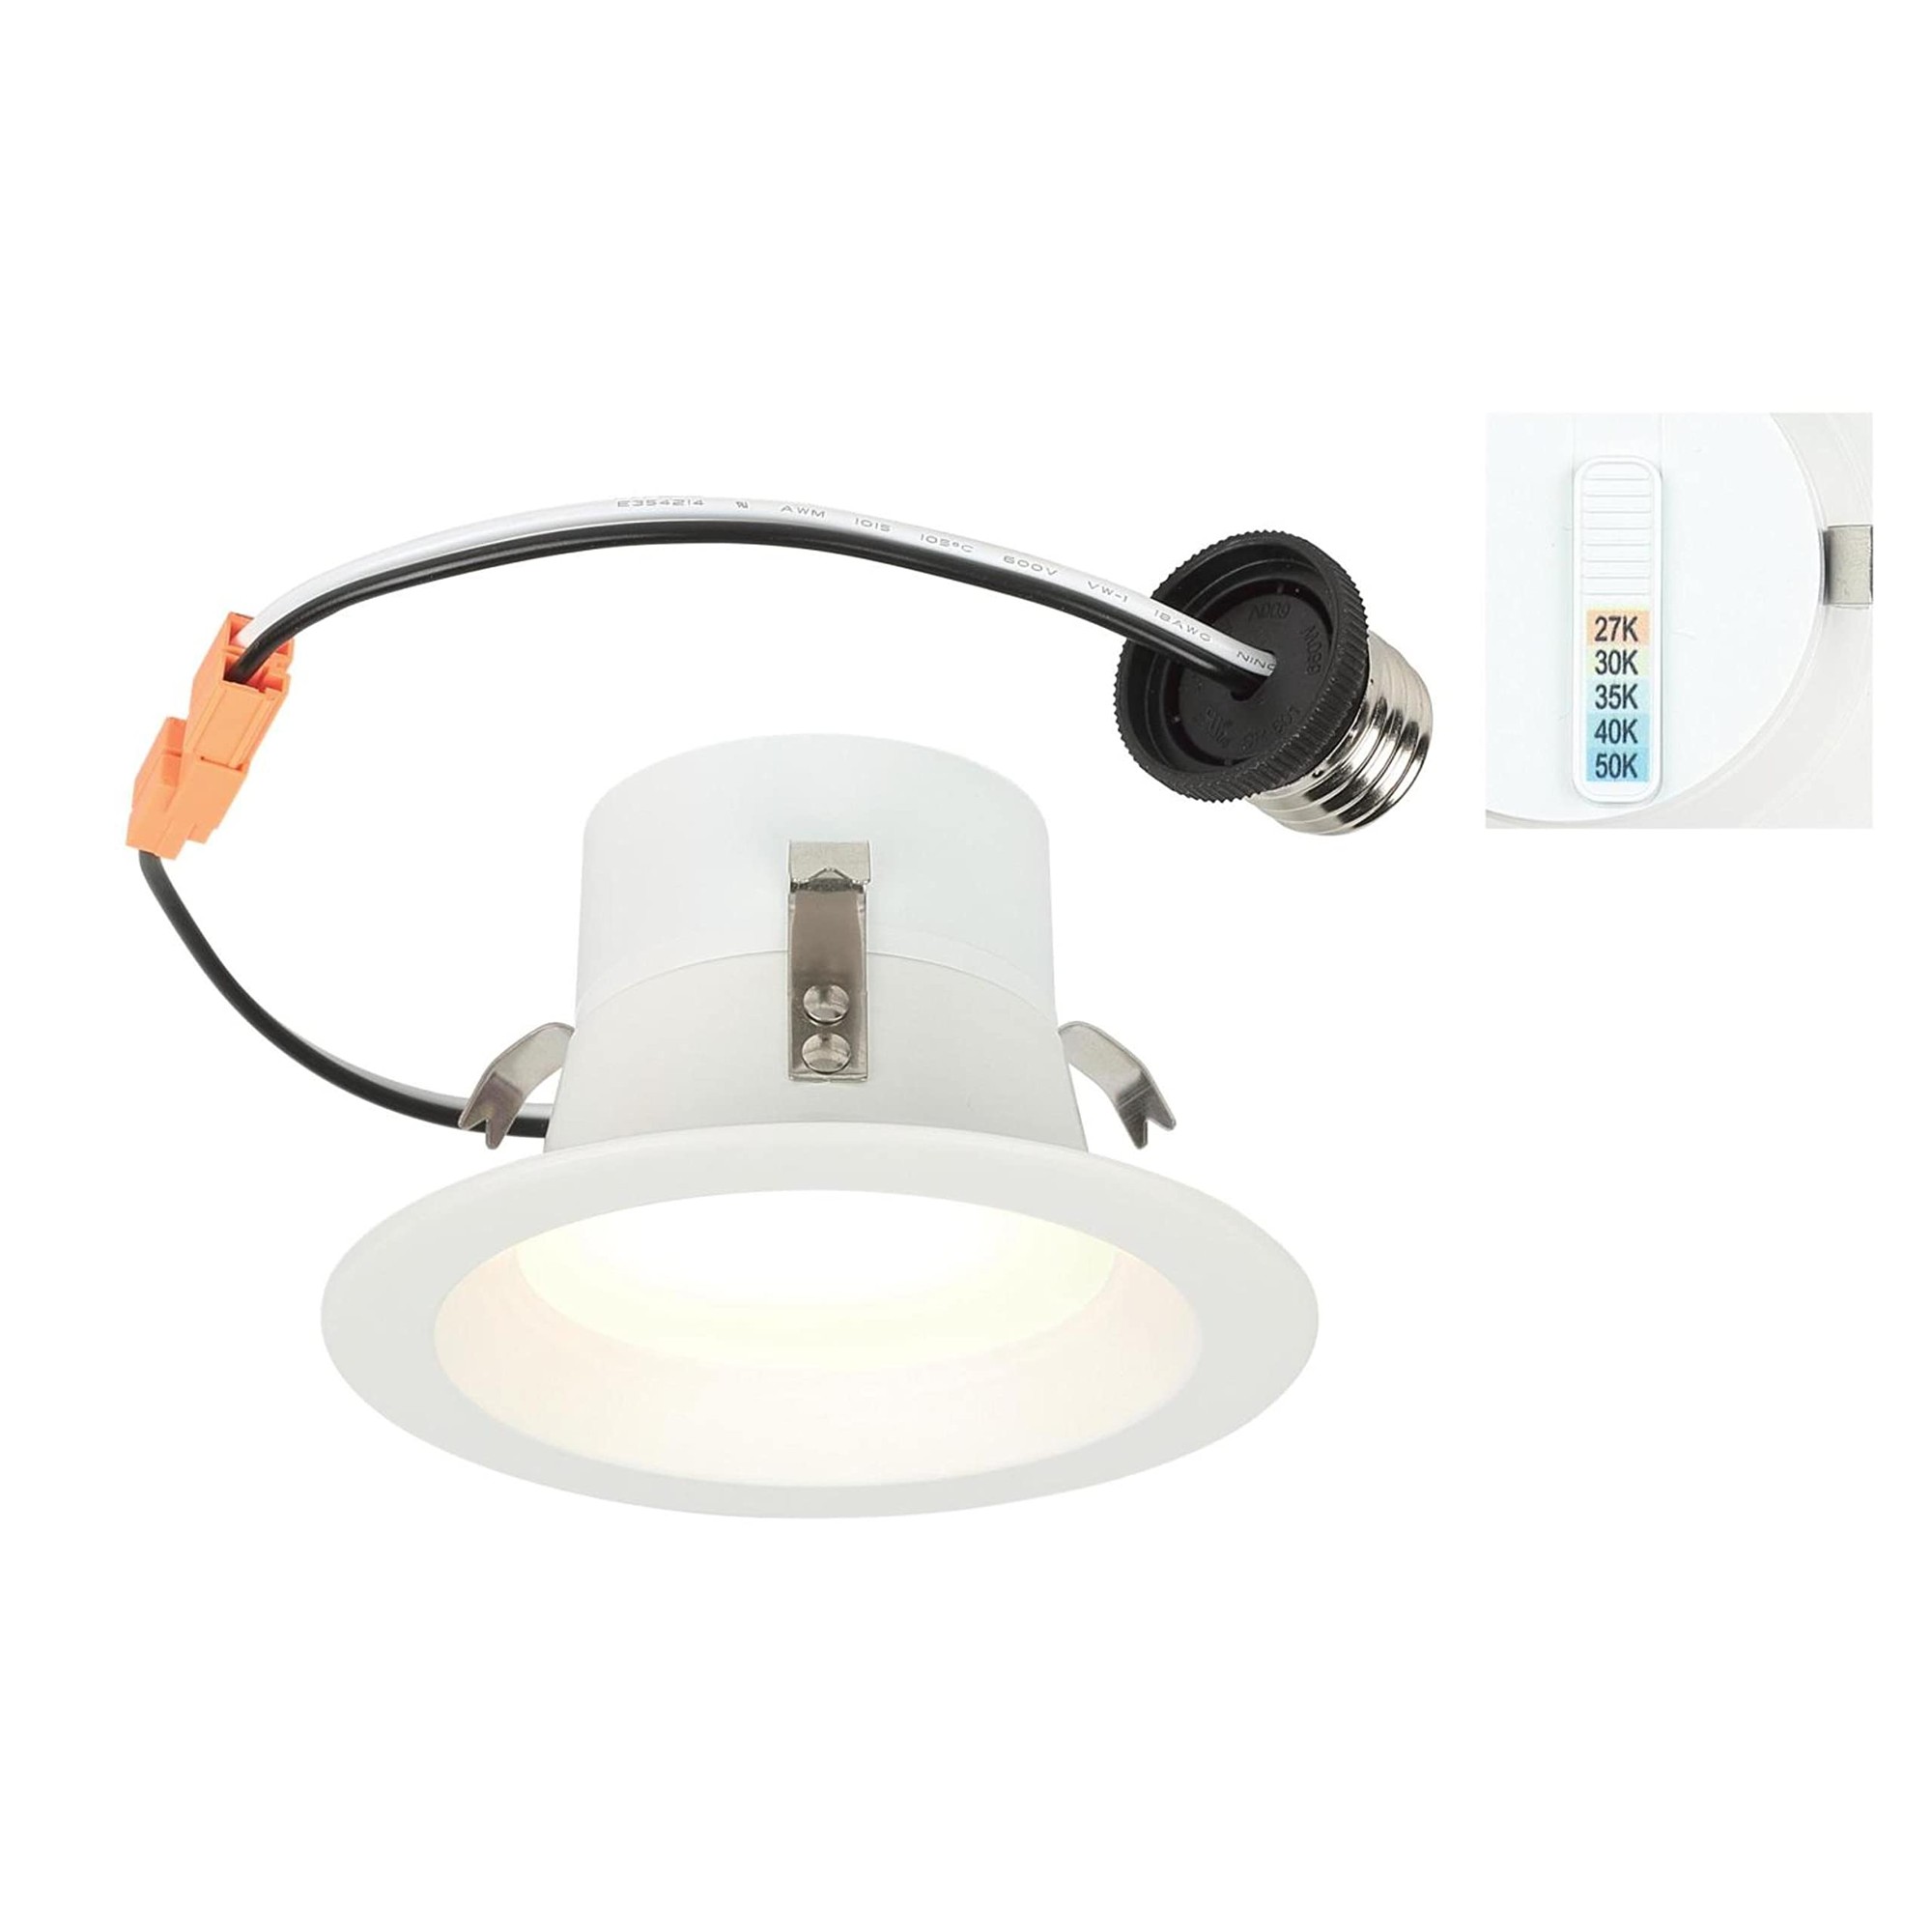 10W Recessed LED Downlight with Color Temperature Selection 4 in. Dimmable 2700K, 3000K, 3500K, 4000K, 5000K, 120 Volt, Box